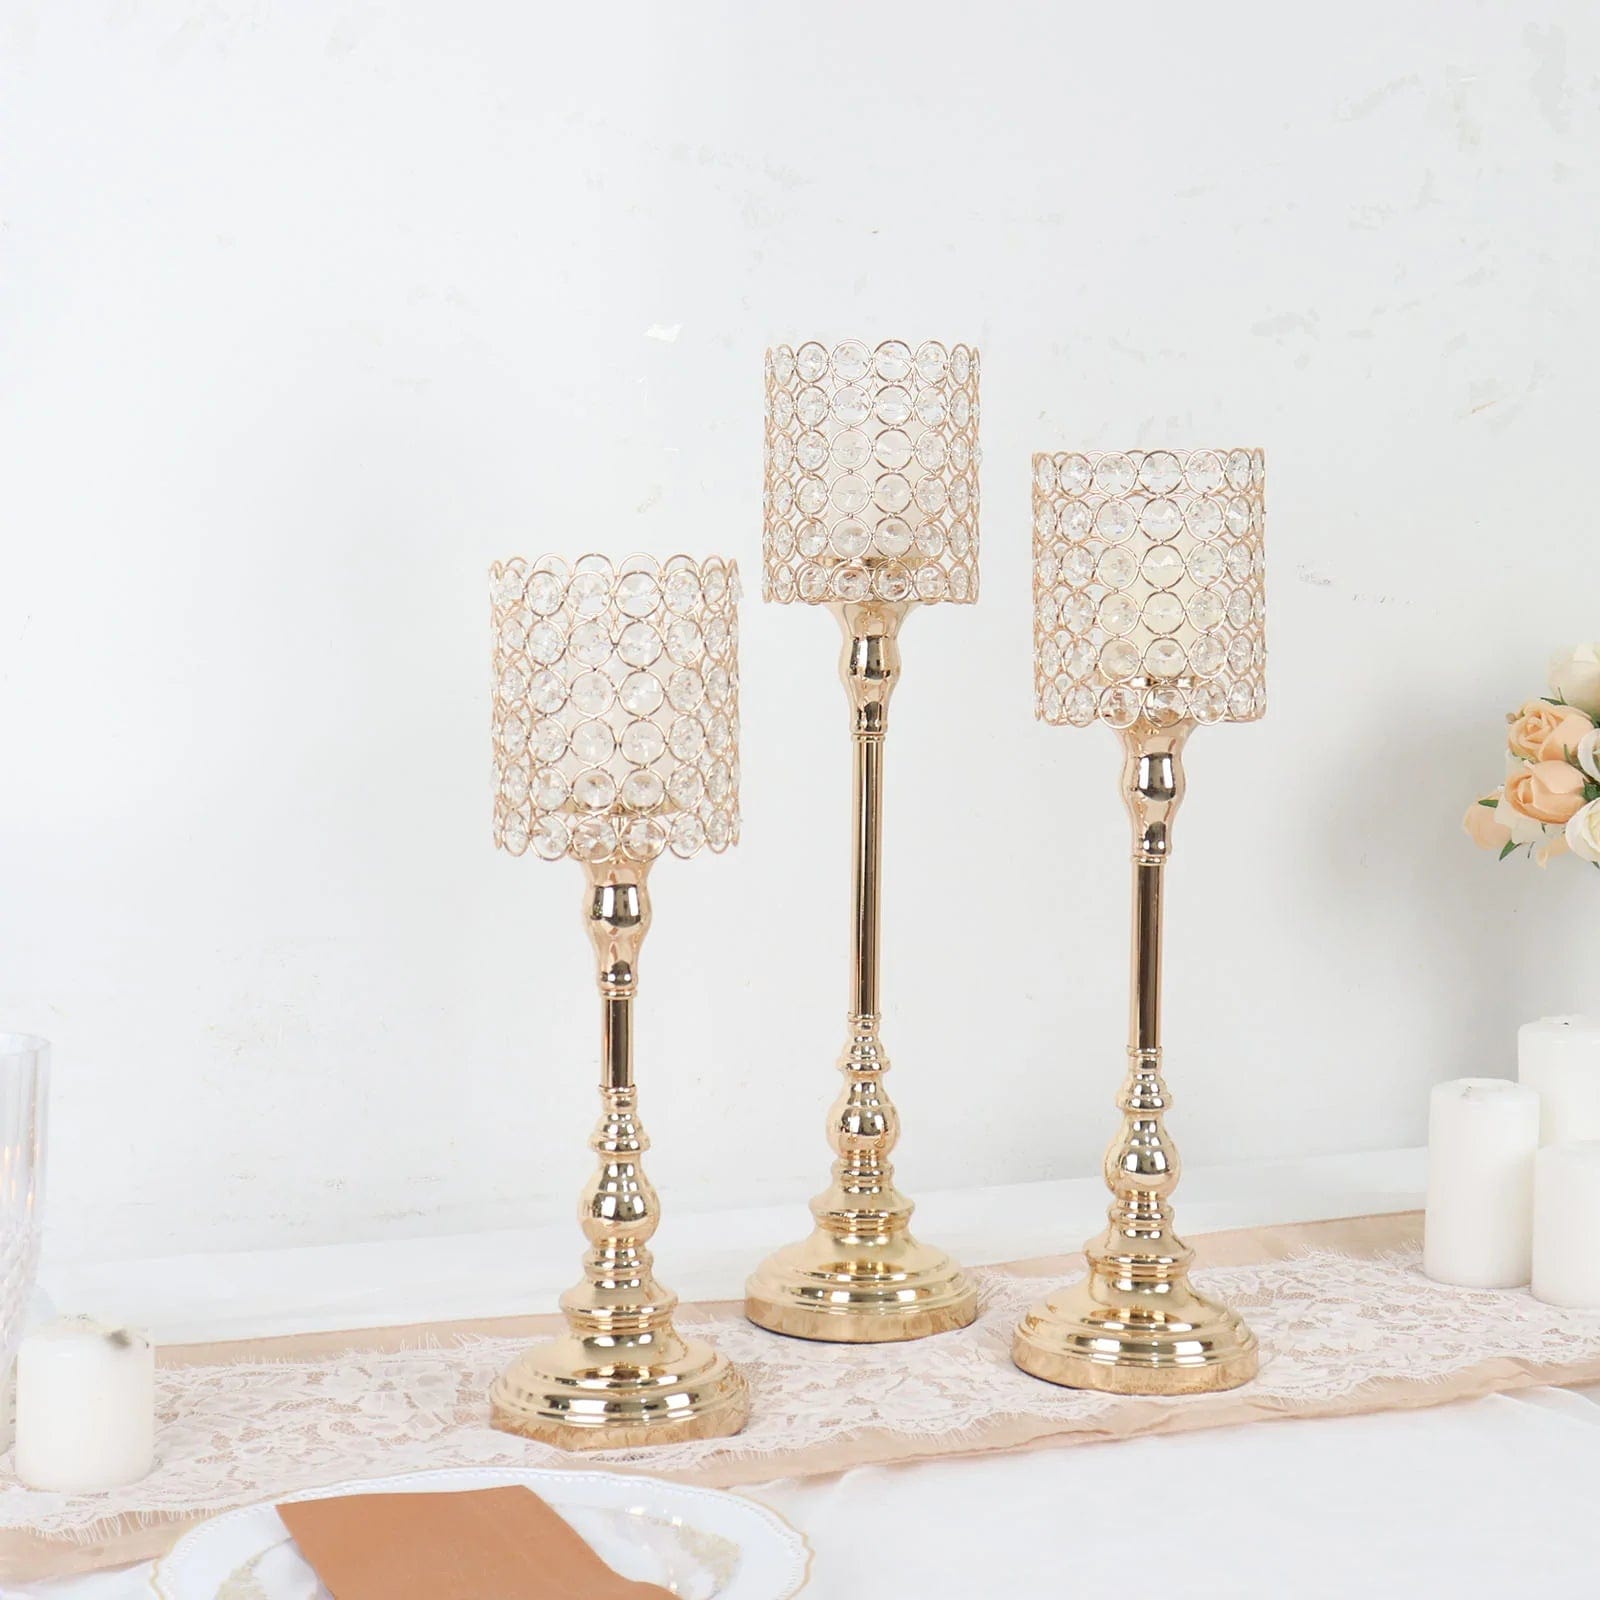 3 Gold Crystal Beaded Metal Goblet Votive Candle Holders Centerpieces